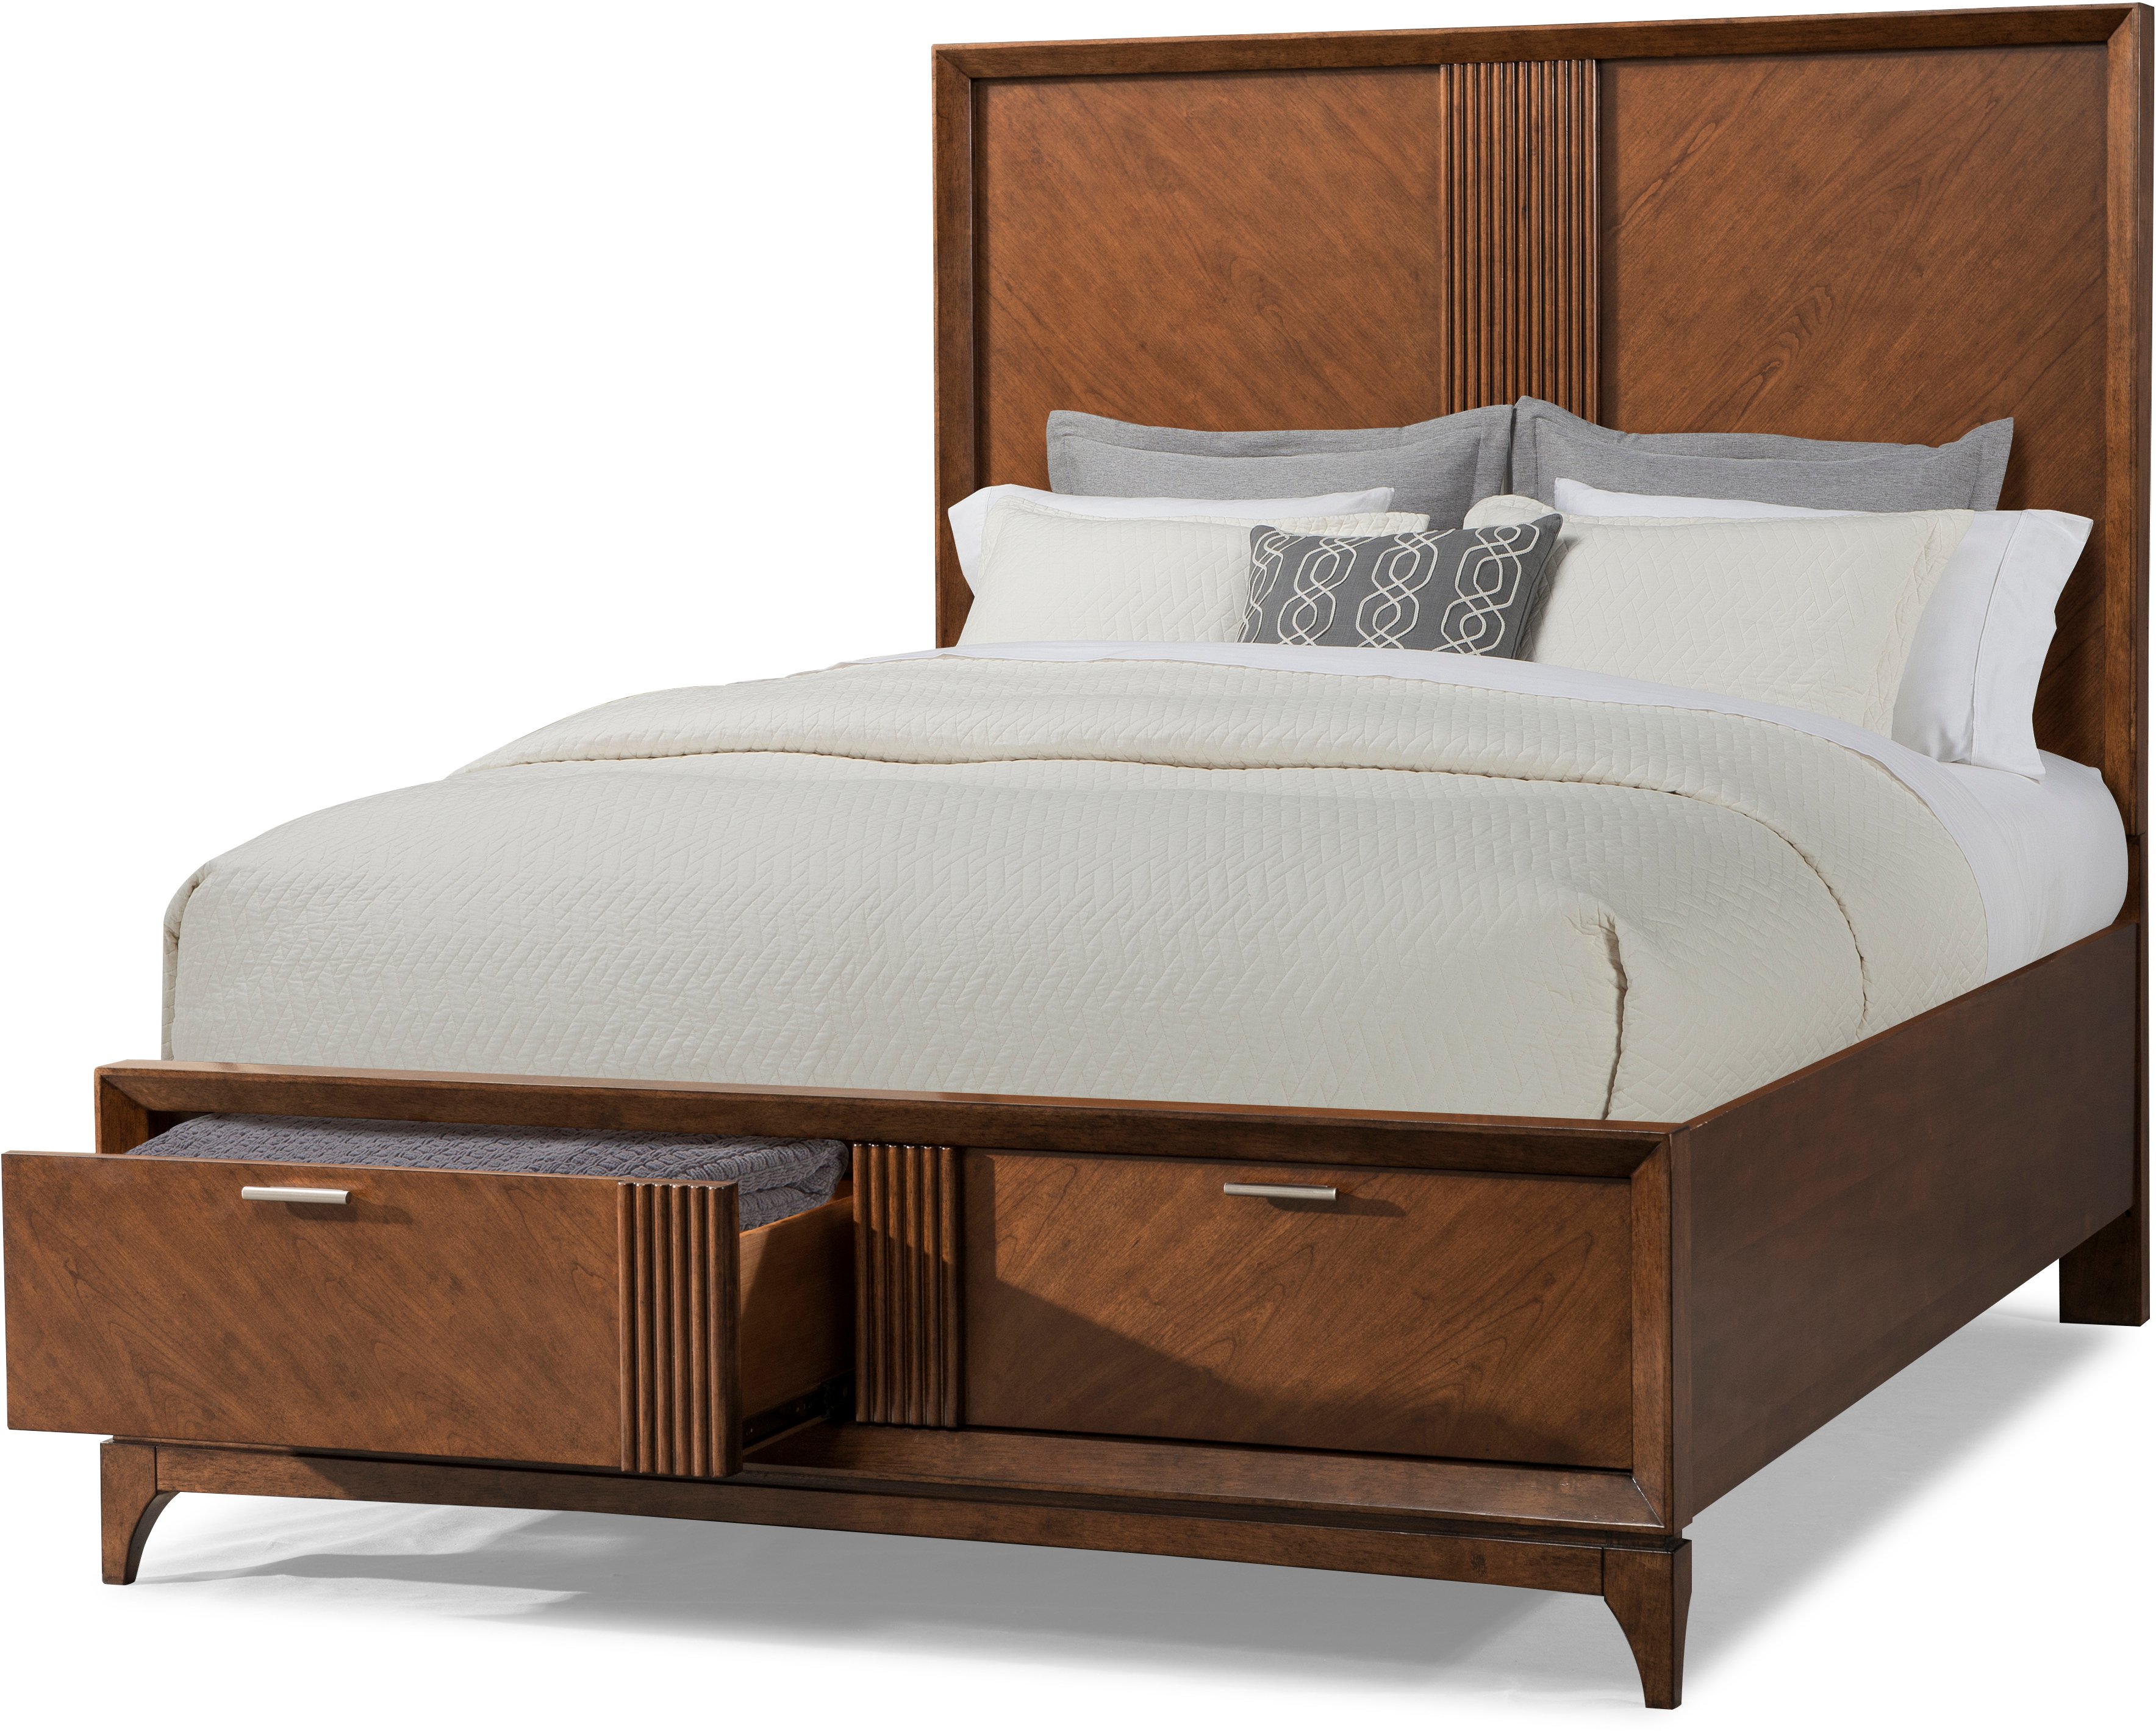 Brown Cherry Mid Century Modern Queen Storage Bed   Simply Urban rcwilley image1